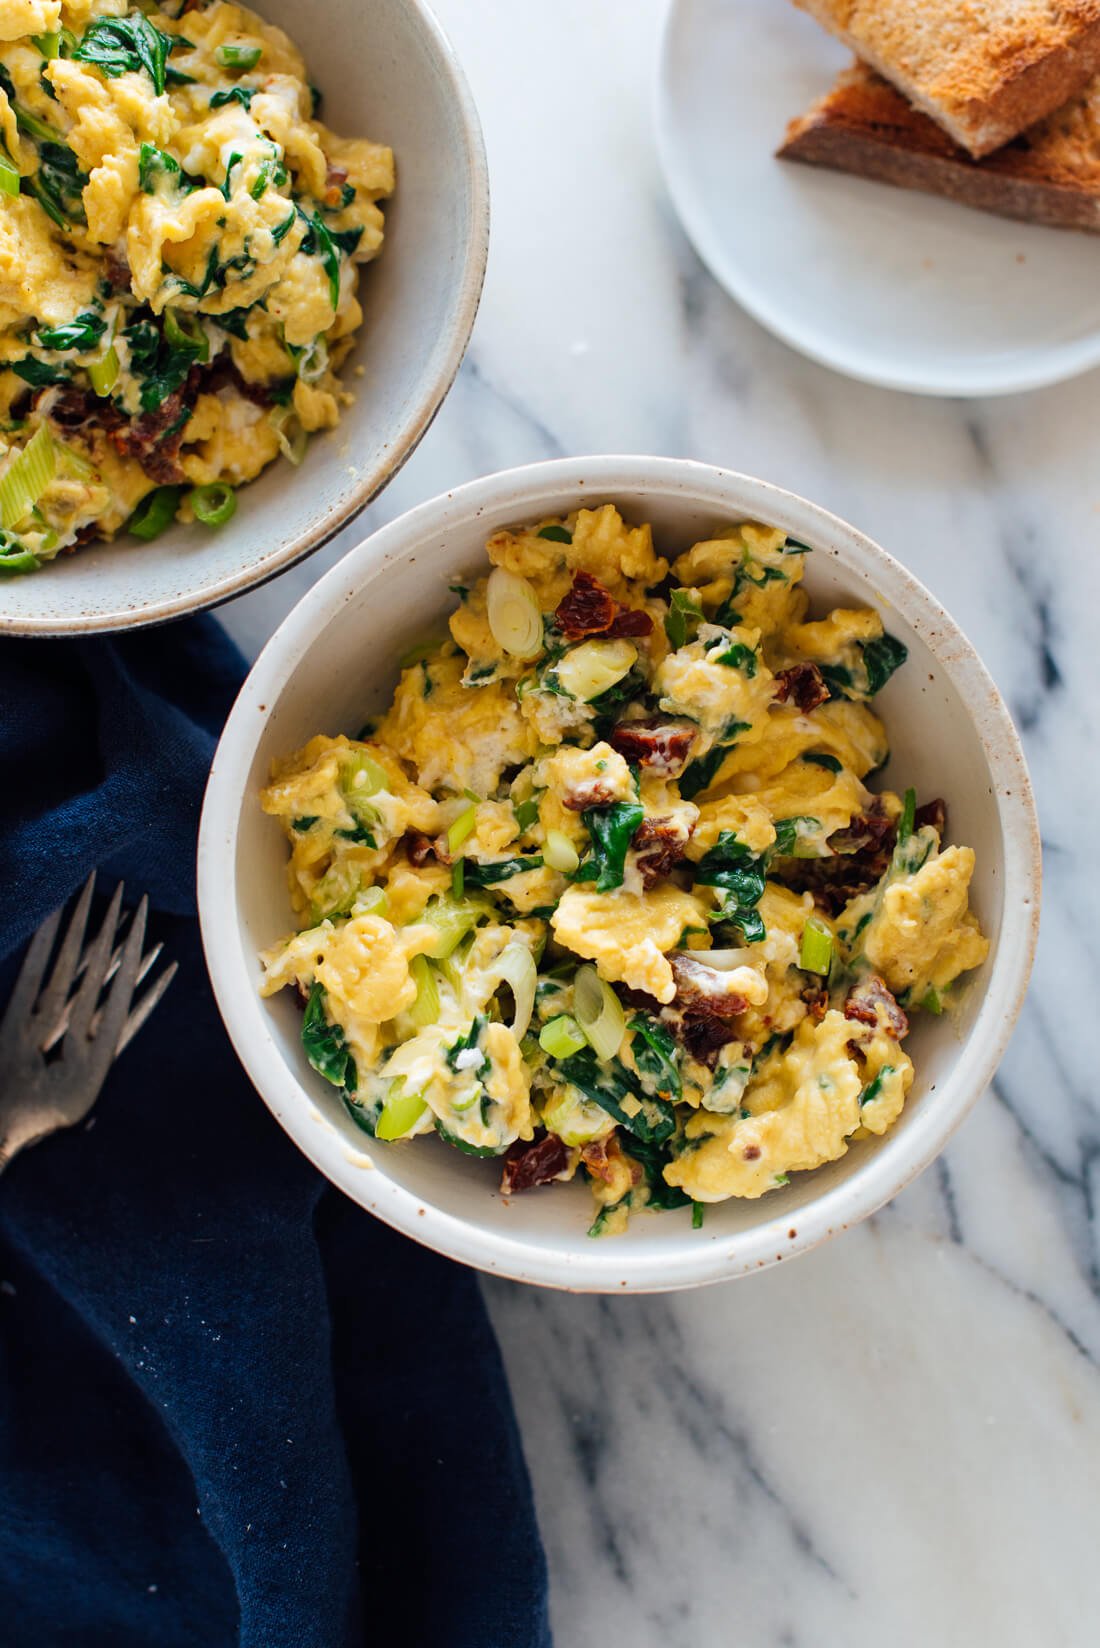 goat cheese scrambled eggs recipe with spinach sun-dried tomatoes